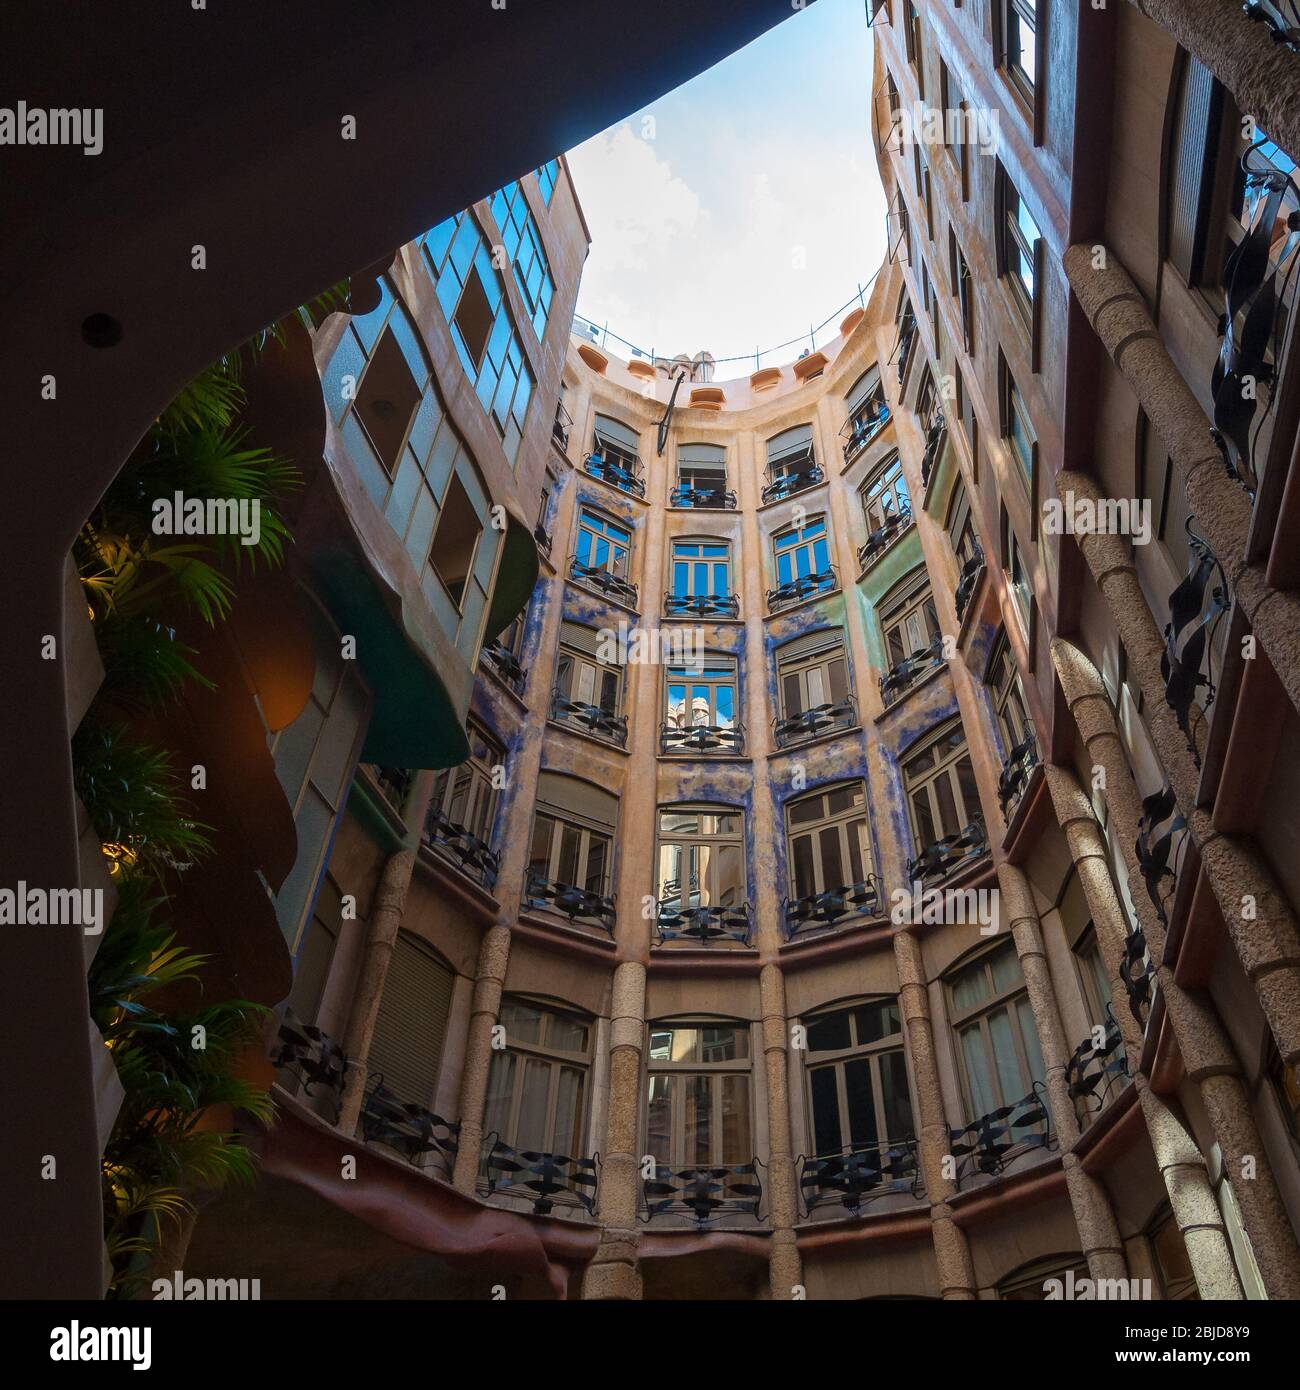 Barcelona, Spain - September 19, 2014: Exterior of the Casa Mila - La Pedrera by Antonio Gaudi. View from bottom to top. Part of the UNESCO World Heri Stock Photo